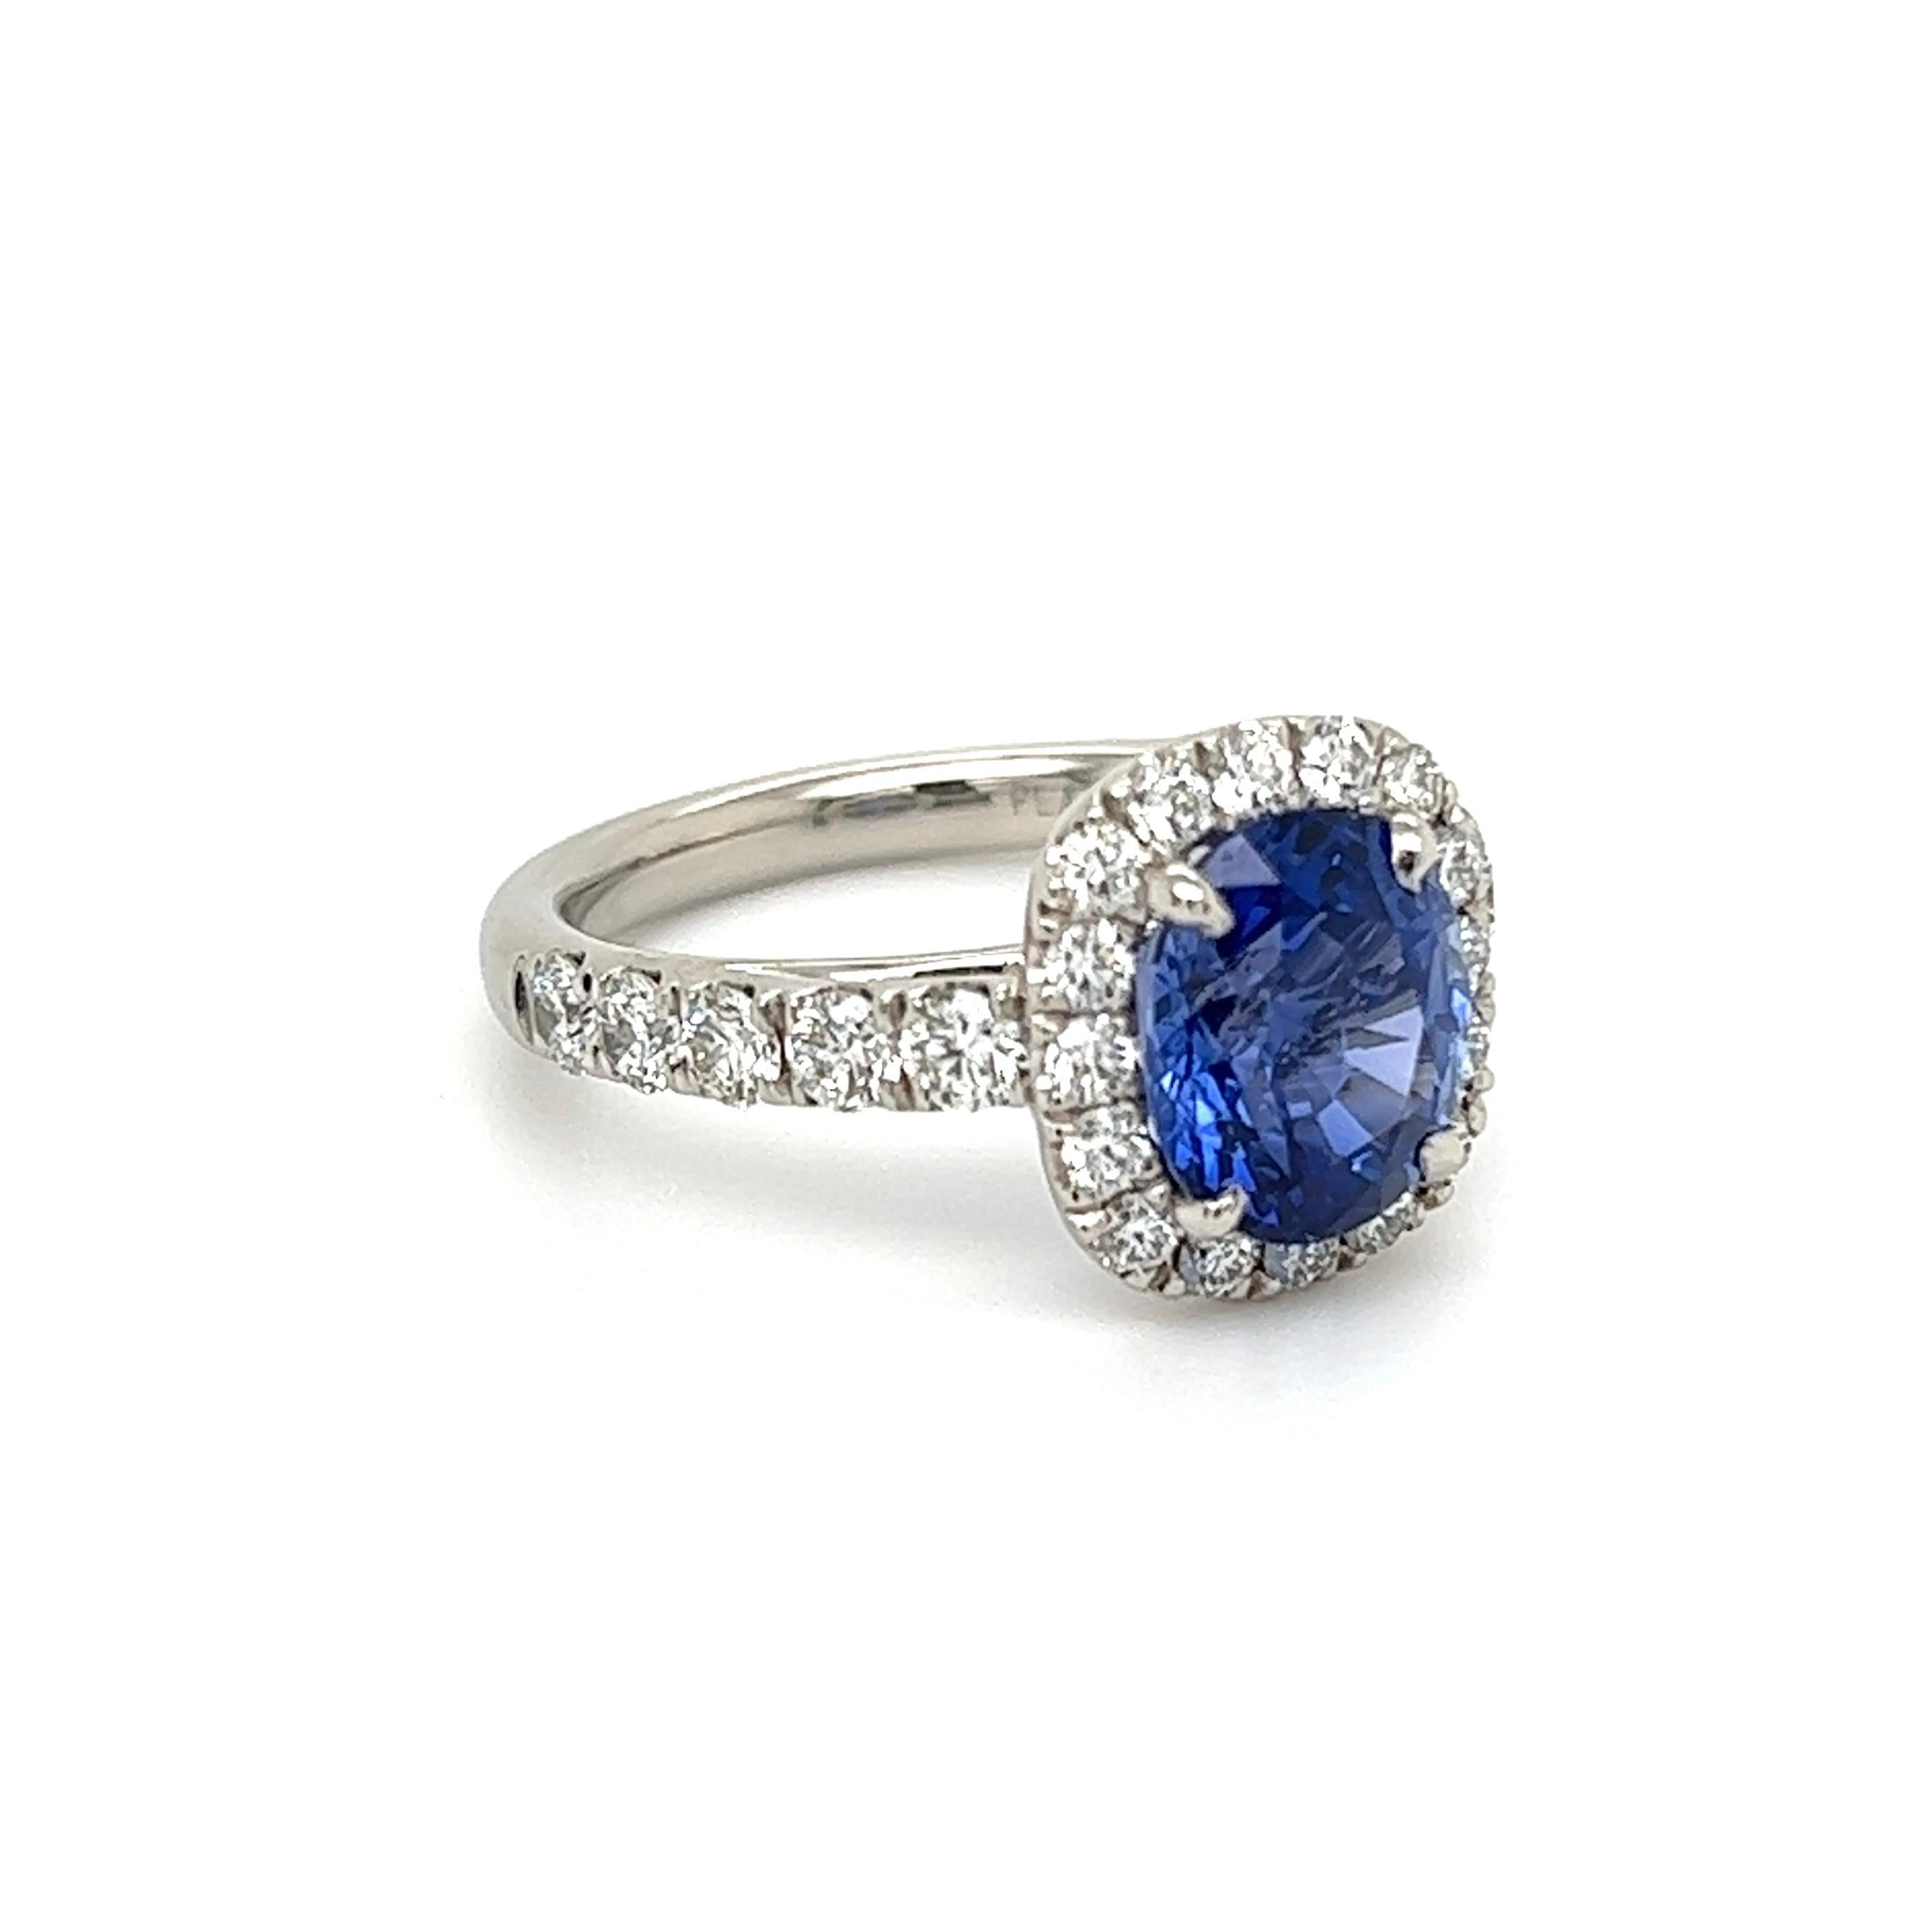 Simply Beautiful! Blue Sapphire and Diamond Platinum Henry Daussi Art Deco Revival Cocktail Ring. Centering a securely nestled Hand set Oval Sapphire weighing 3.00 Carat, measuring 8.96 x 7.60 x 5.30mm. Surrounded by Diamonds, weighing approx.